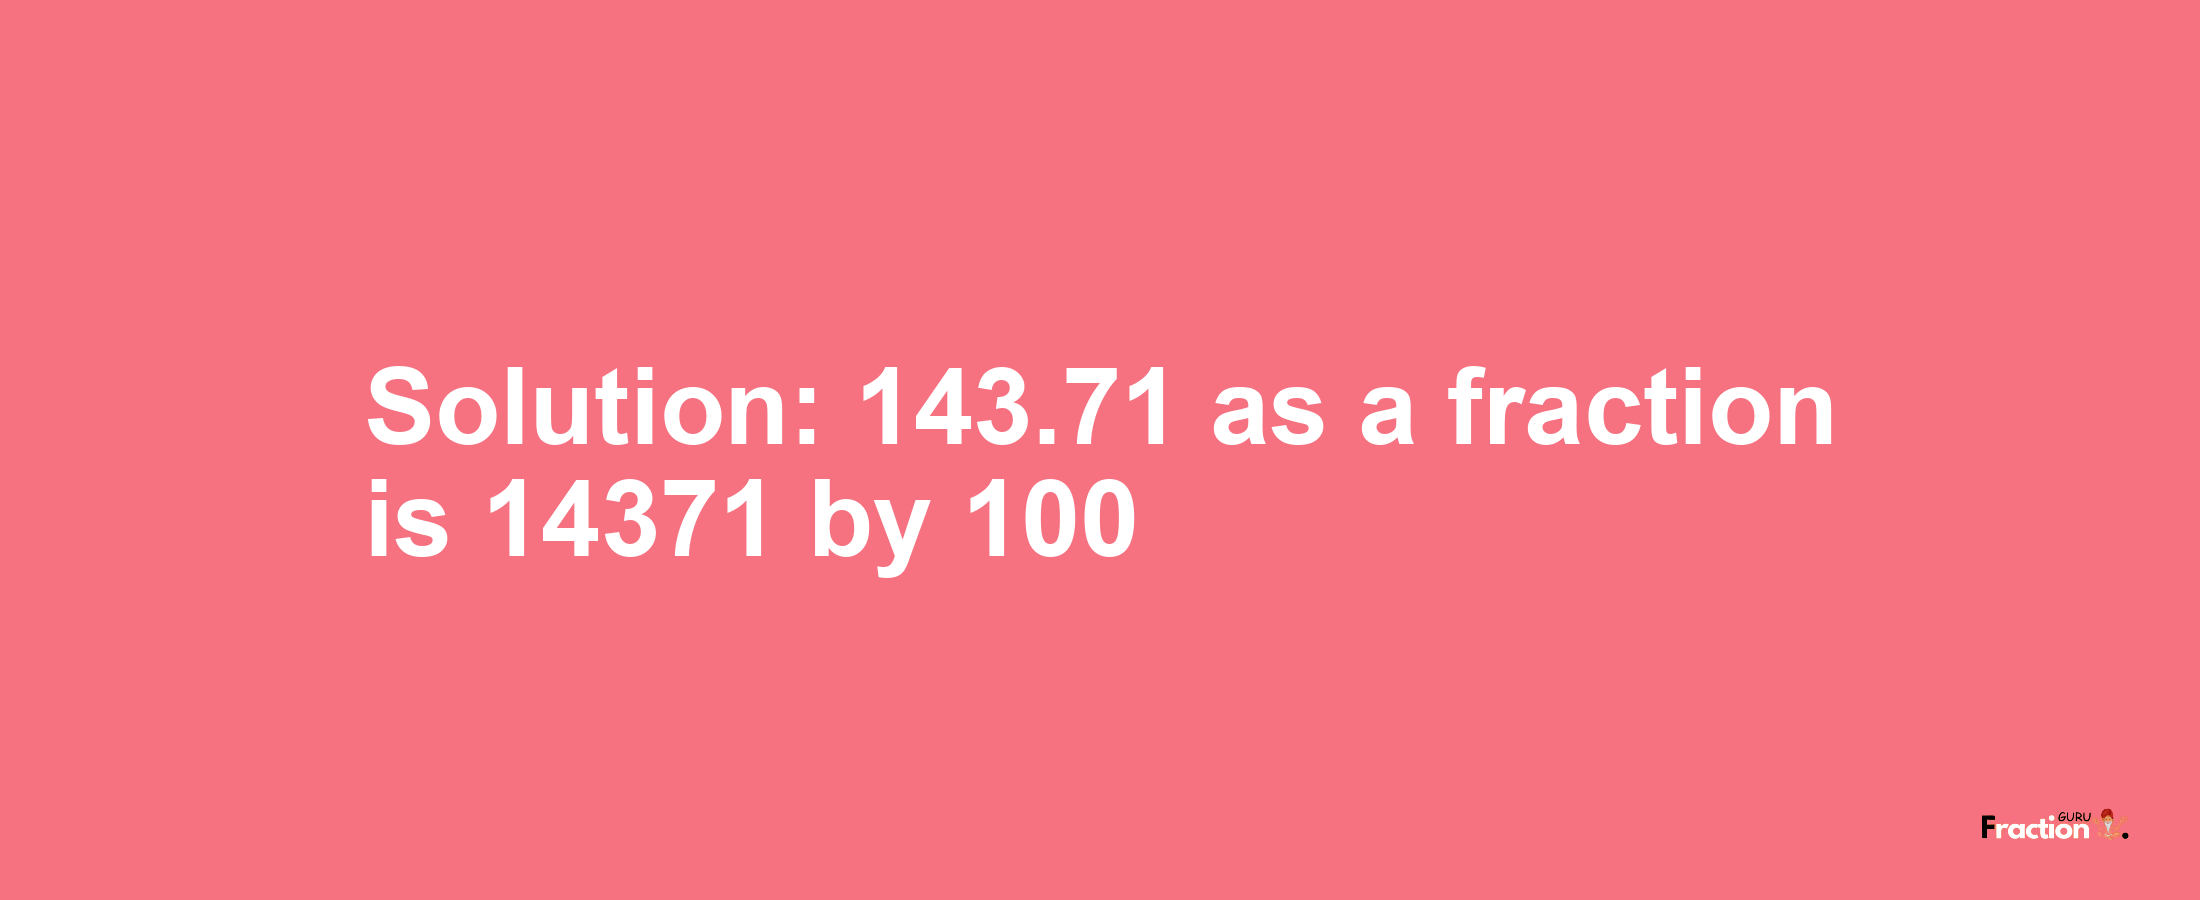 Solution:143.71 as a fraction is 14371/100